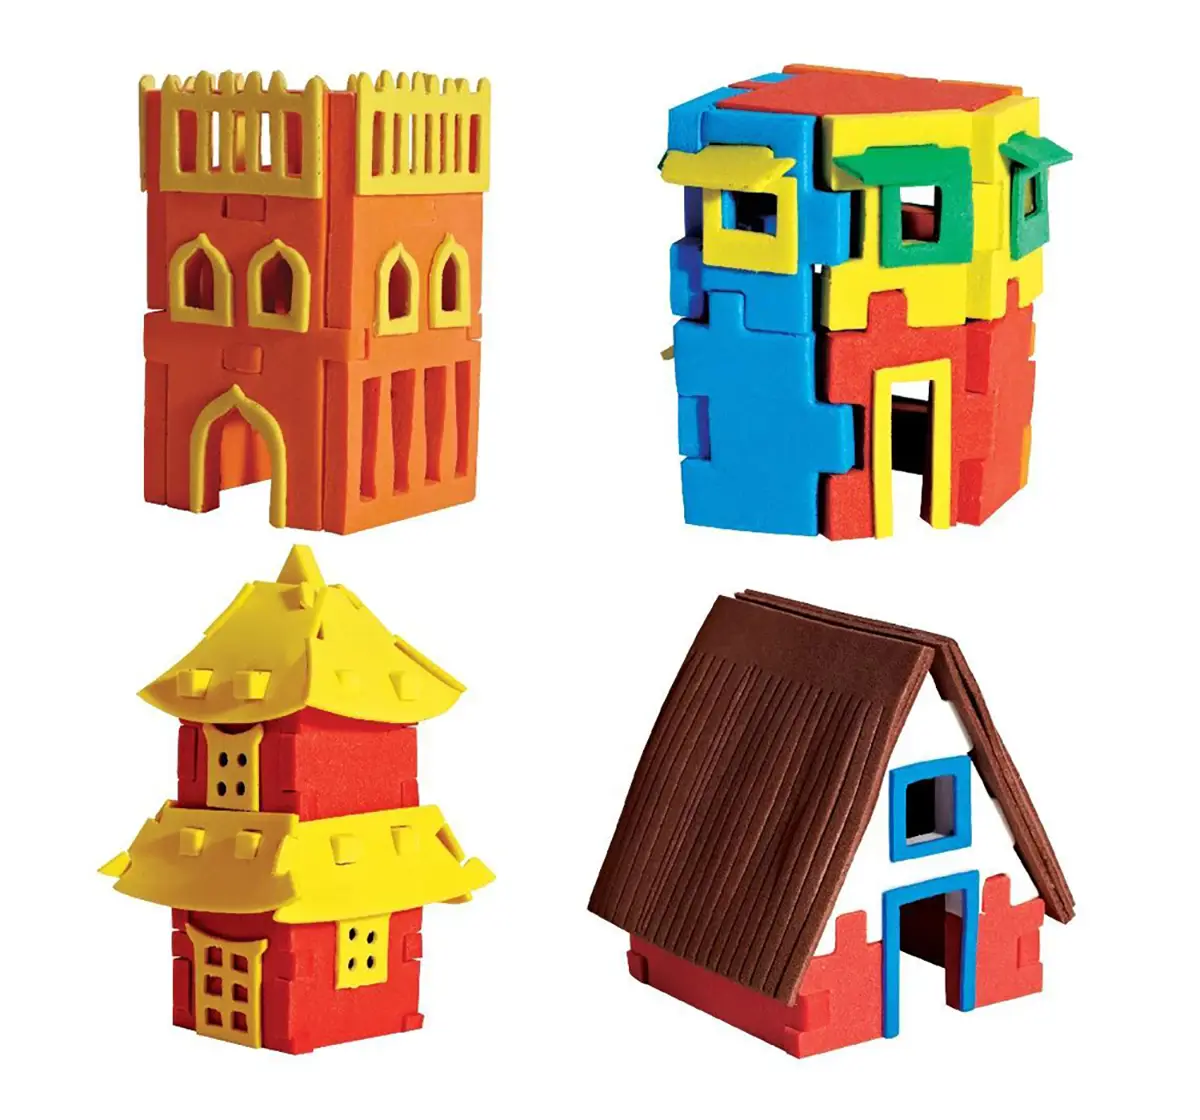 Imagimake Worldwide: Houses Games for Kids Age 5Y+